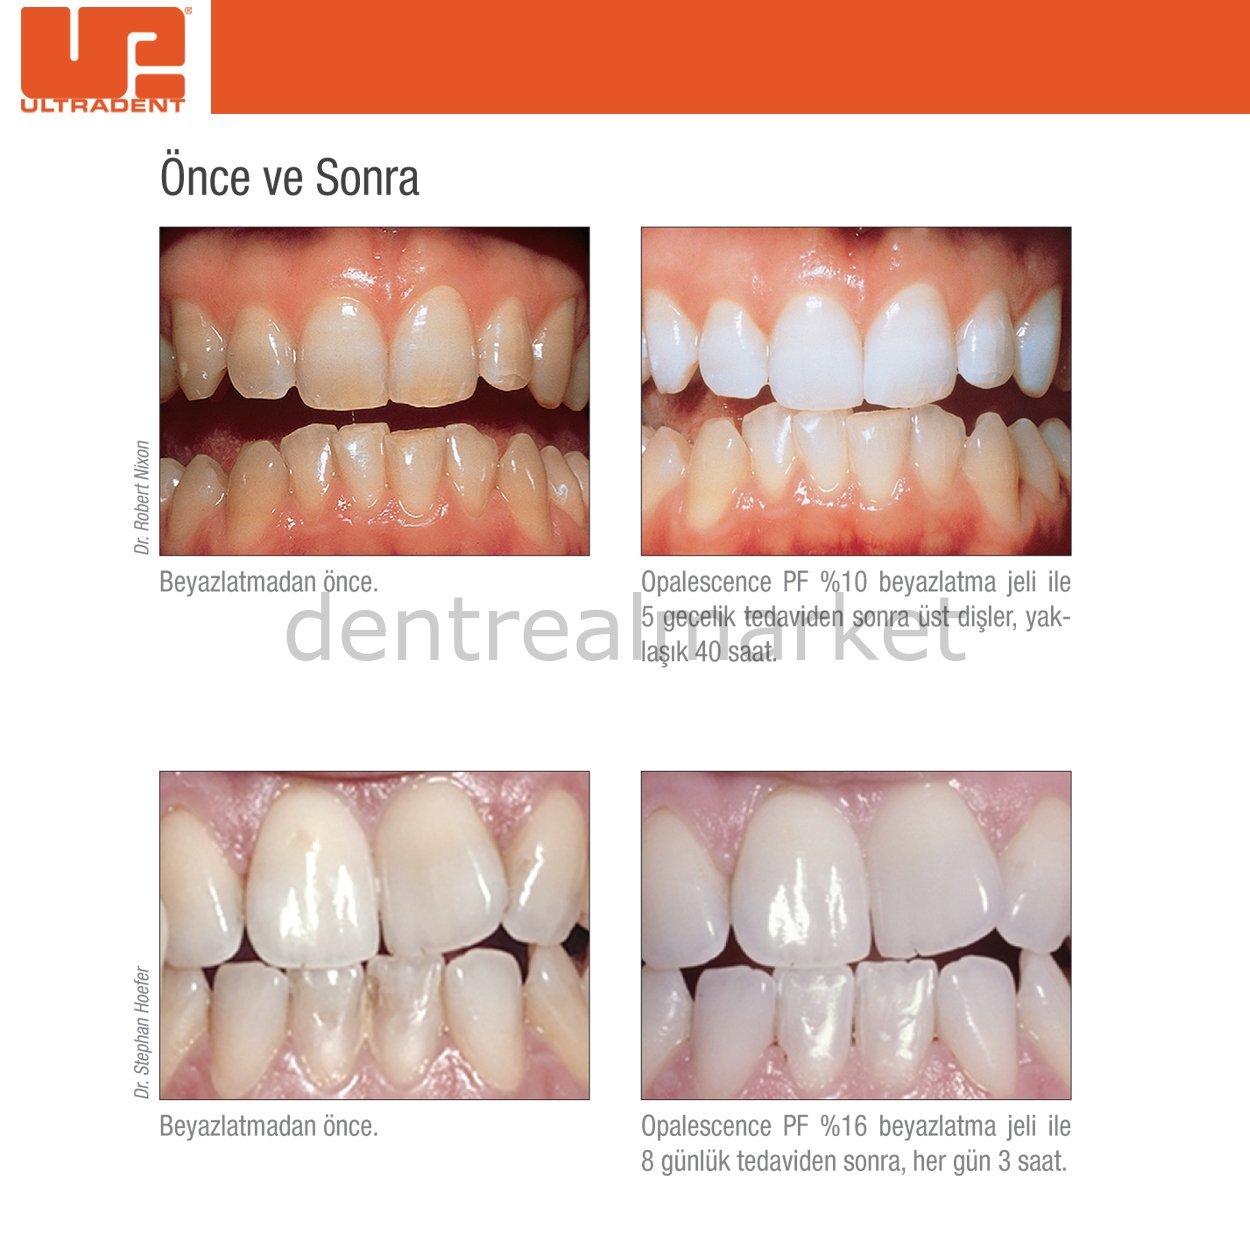 DentrealStore - Ultradent Opalescence Tooth Whitening - Carbamide Peroxide-Teeth Whitening at Home